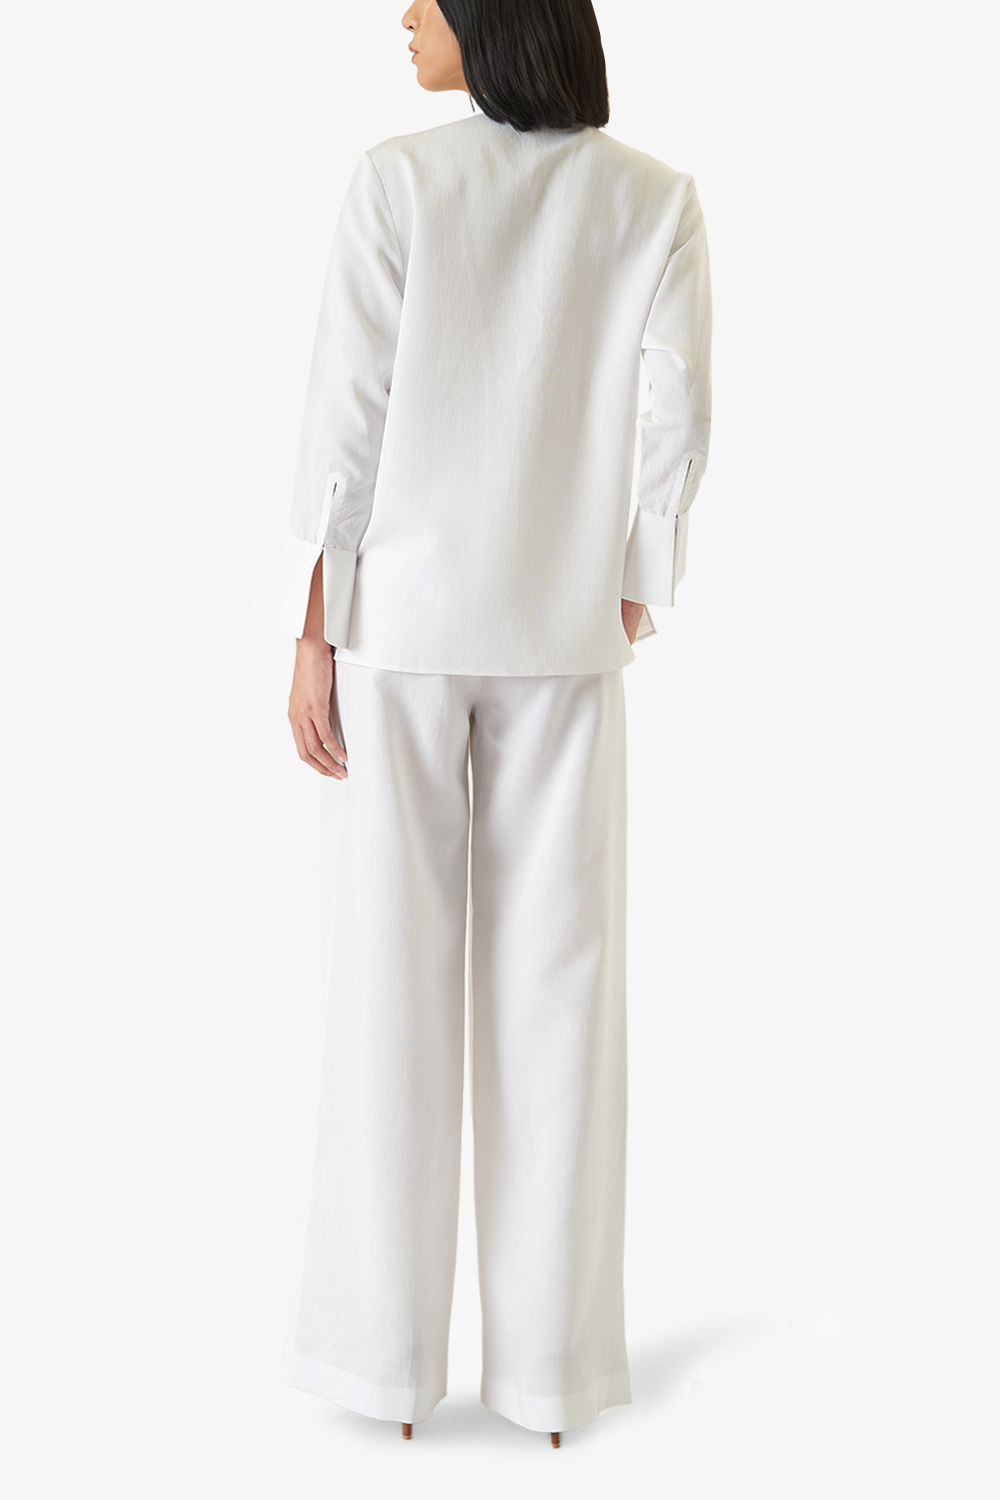 White Citron Top with Snow Pants